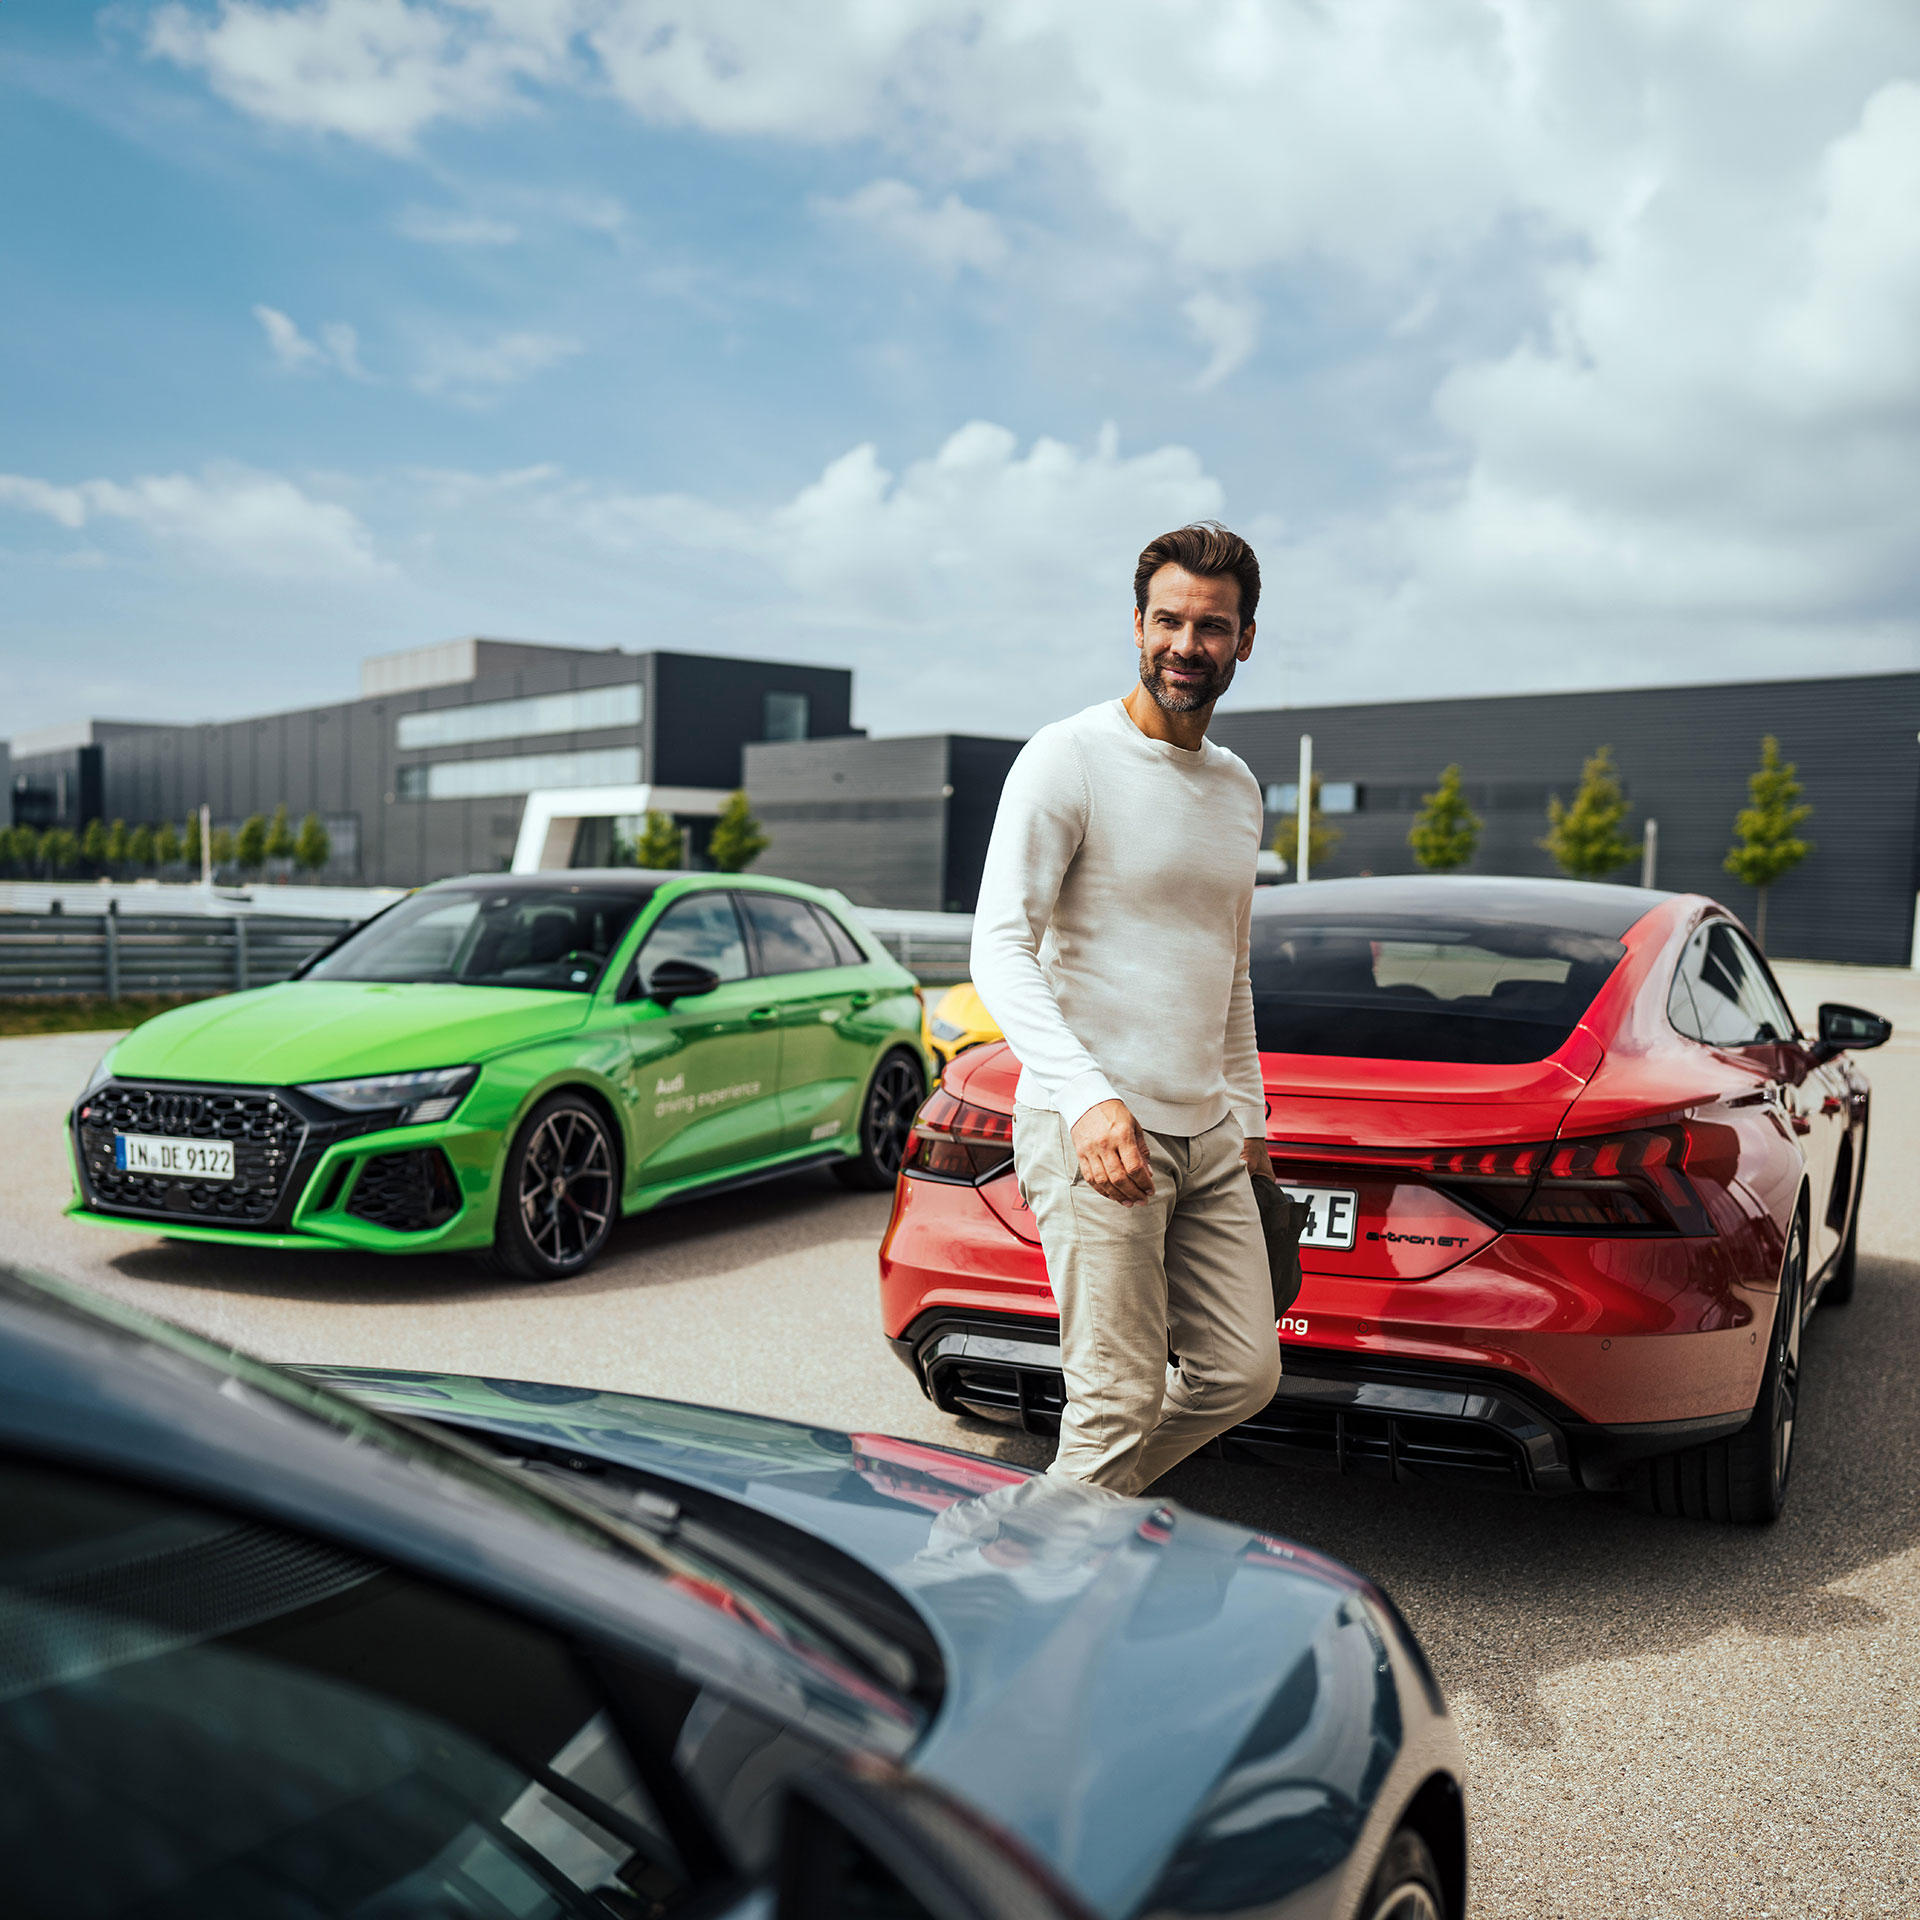 A man walks between three cars, on the left is a light green Audi model, to the right is a red Audi RS e-tron GT and in front is another dark grey Audi model.